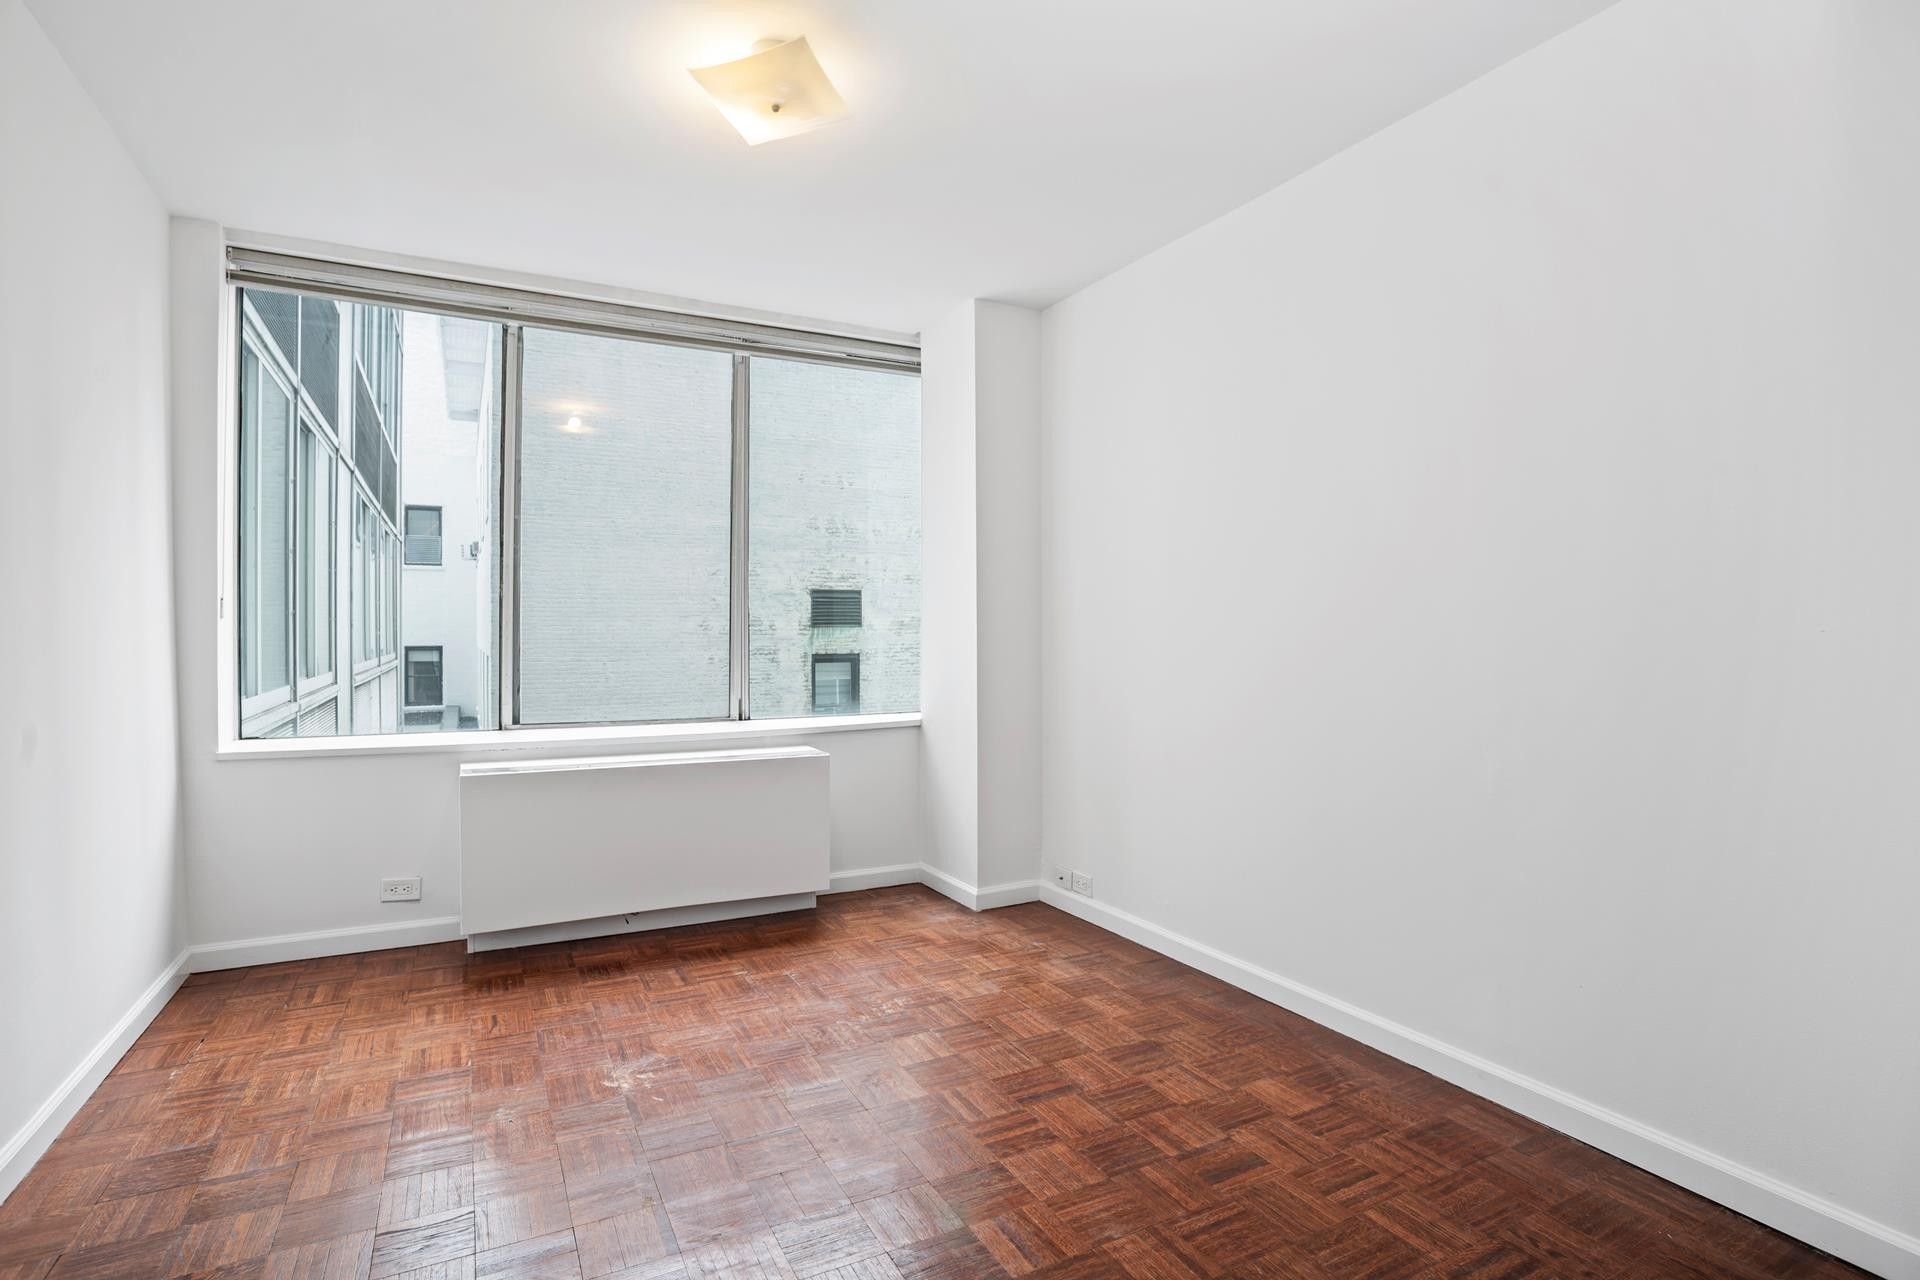 8. Co-op Properties for Sale at The Harmony, 61 W 62ND ST, 15A Lincoln Square, New York, NY 10023